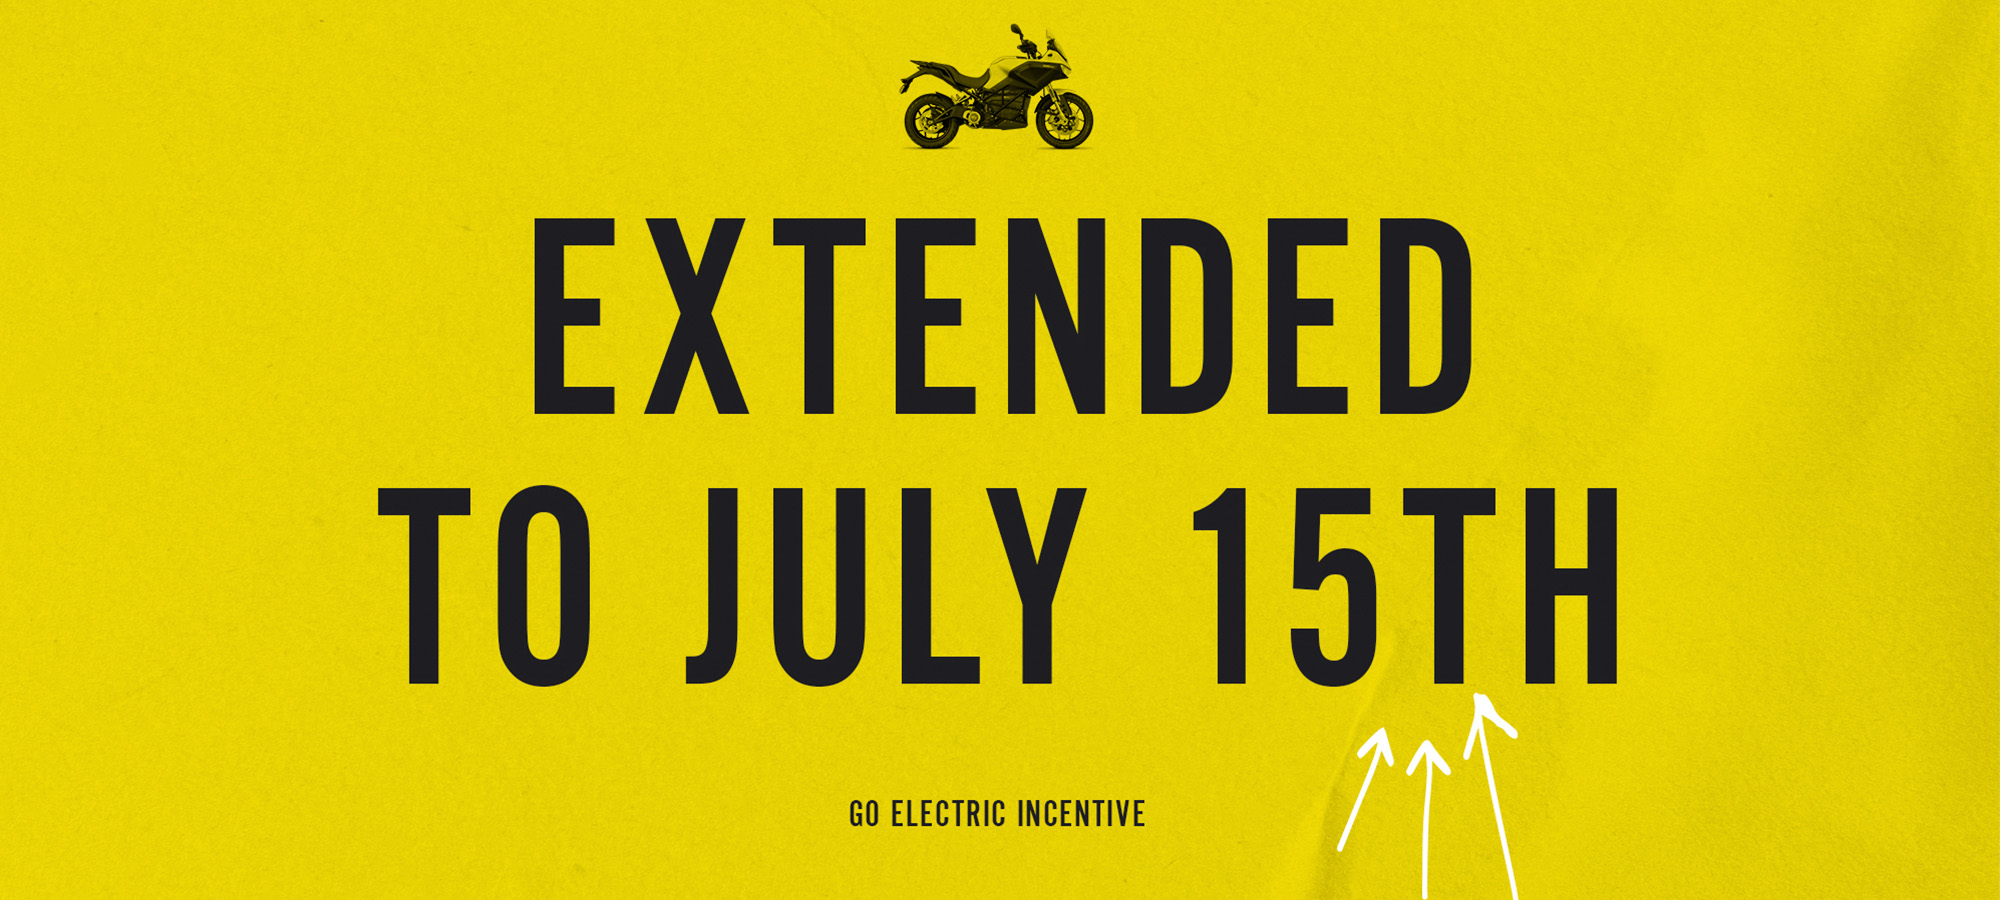 Zero Motorcycles - Go Electric Incentive at Randy's Cycle